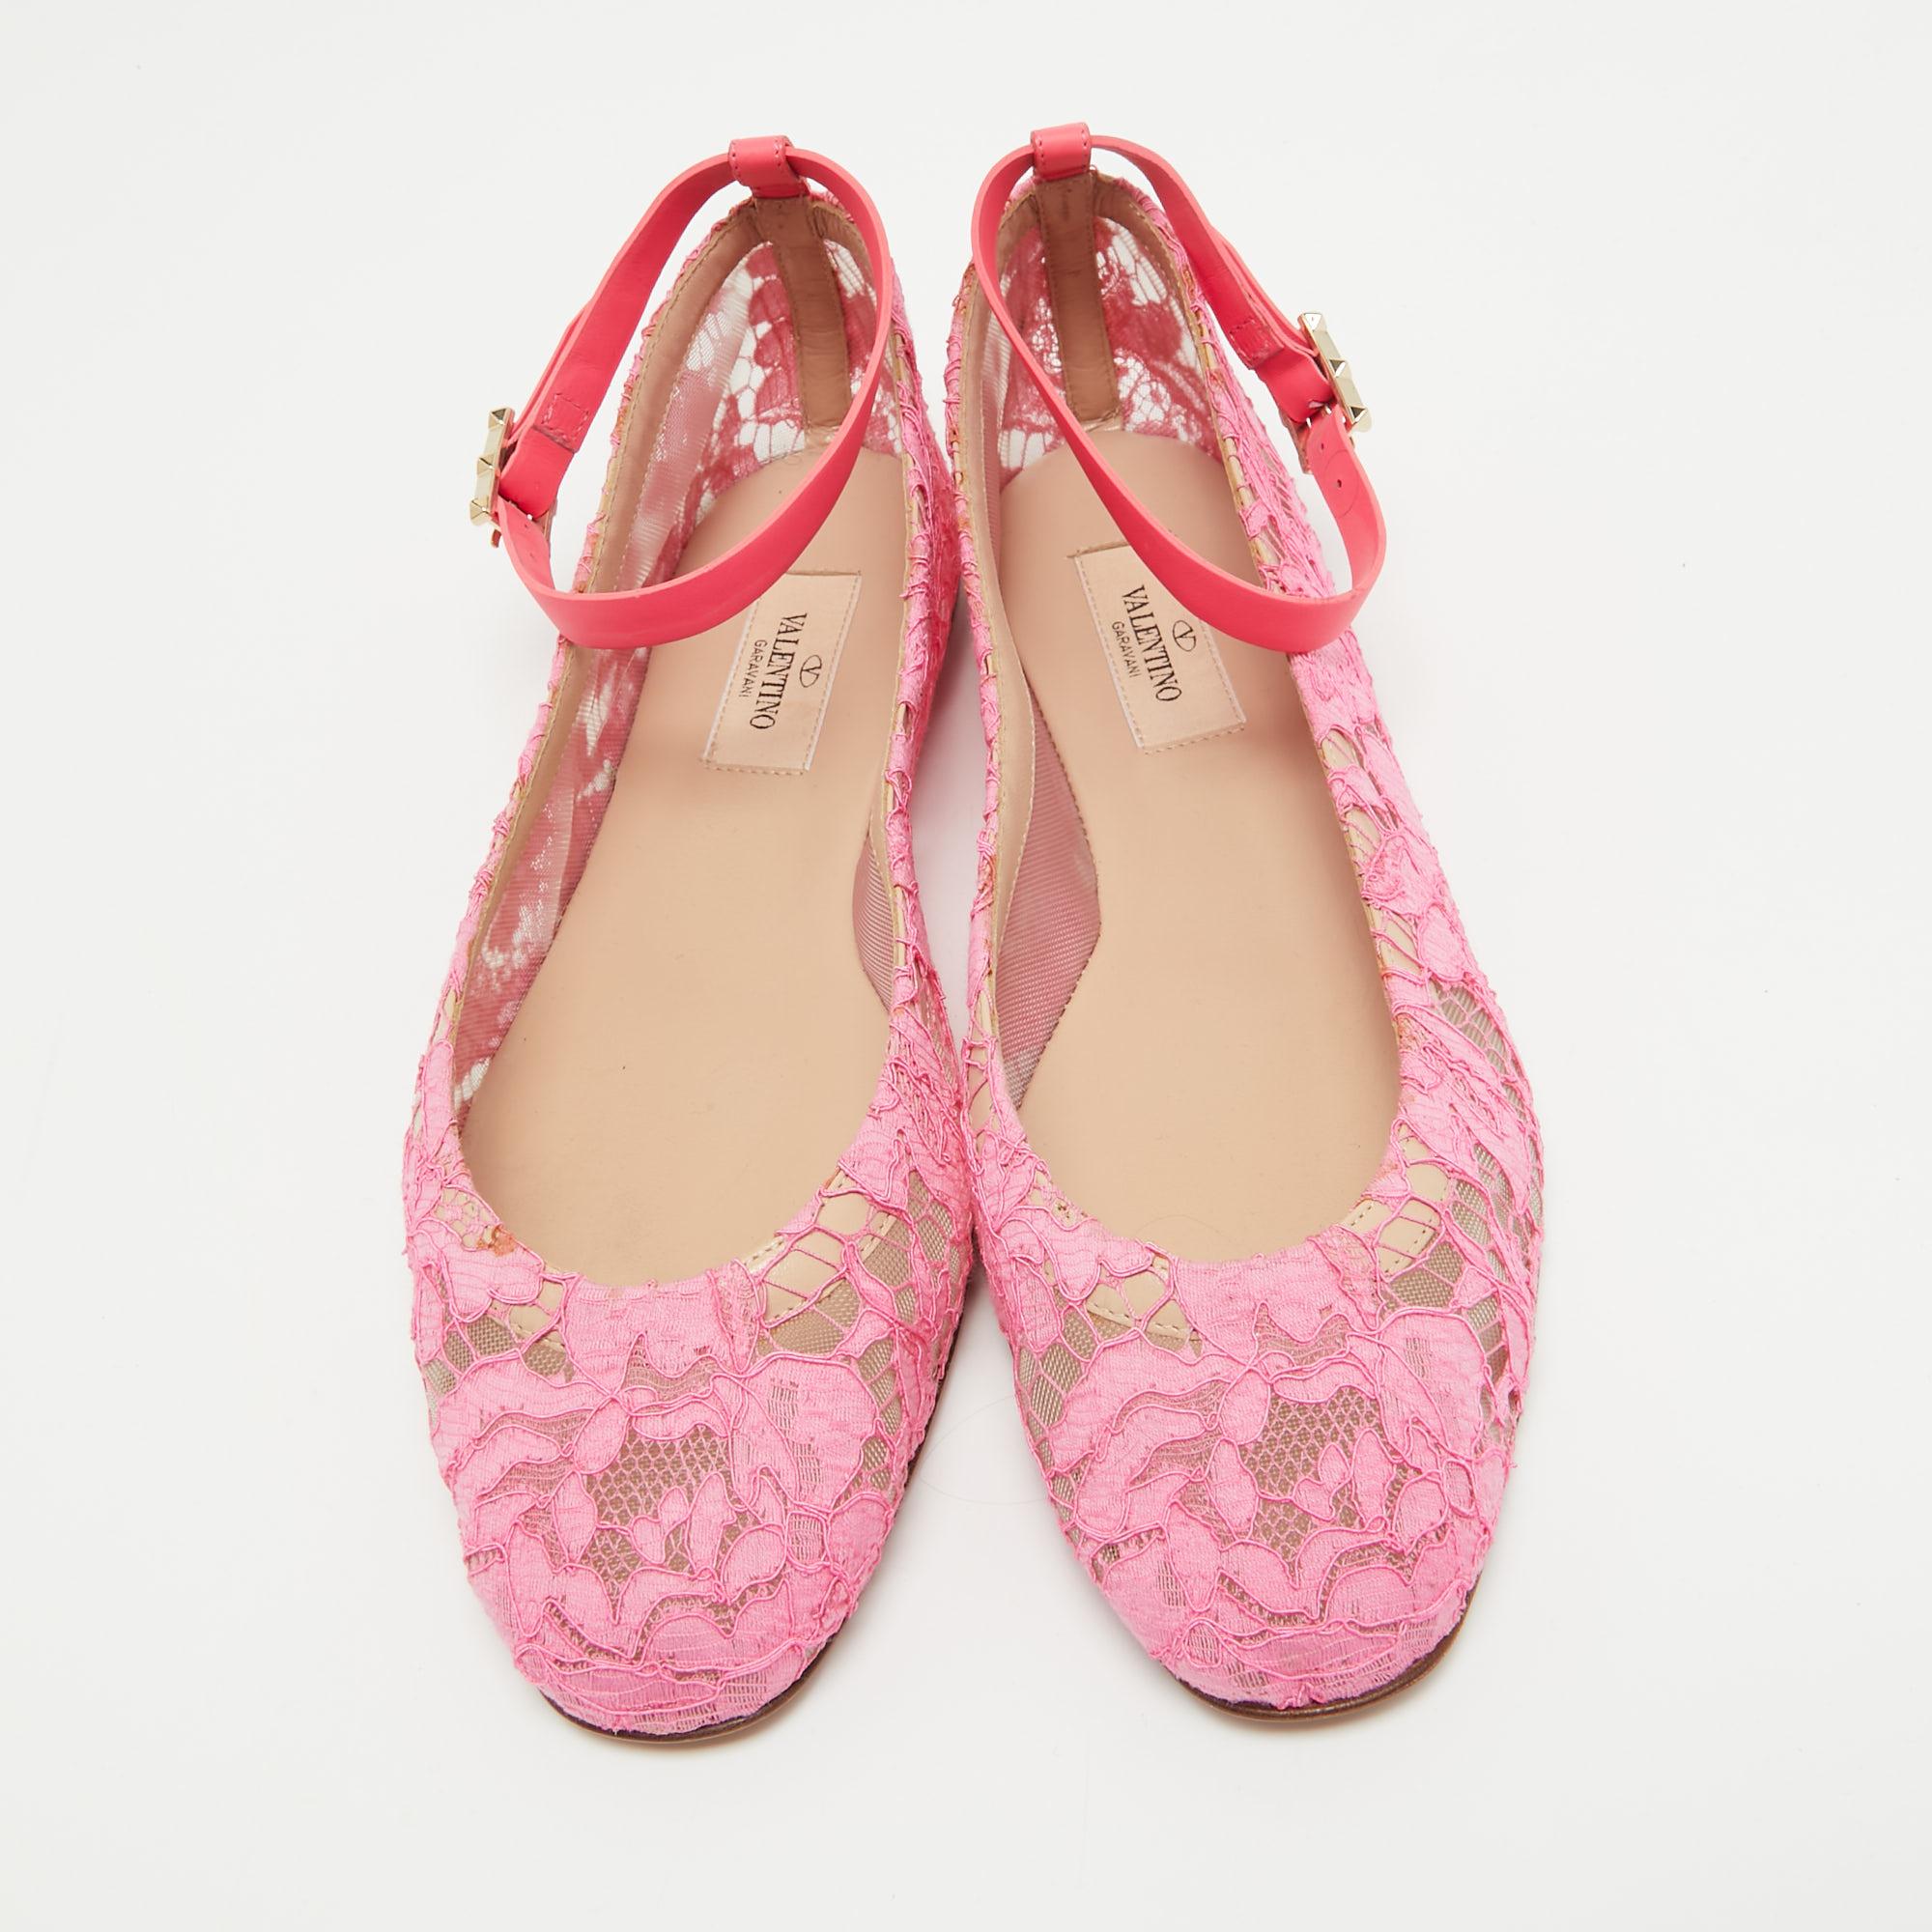 Valentino Pink Lace and Leather Ankle Wrap Ballet Flats Size 40 In Excellent Condition For Sale In Dubai, Al Qouz 2